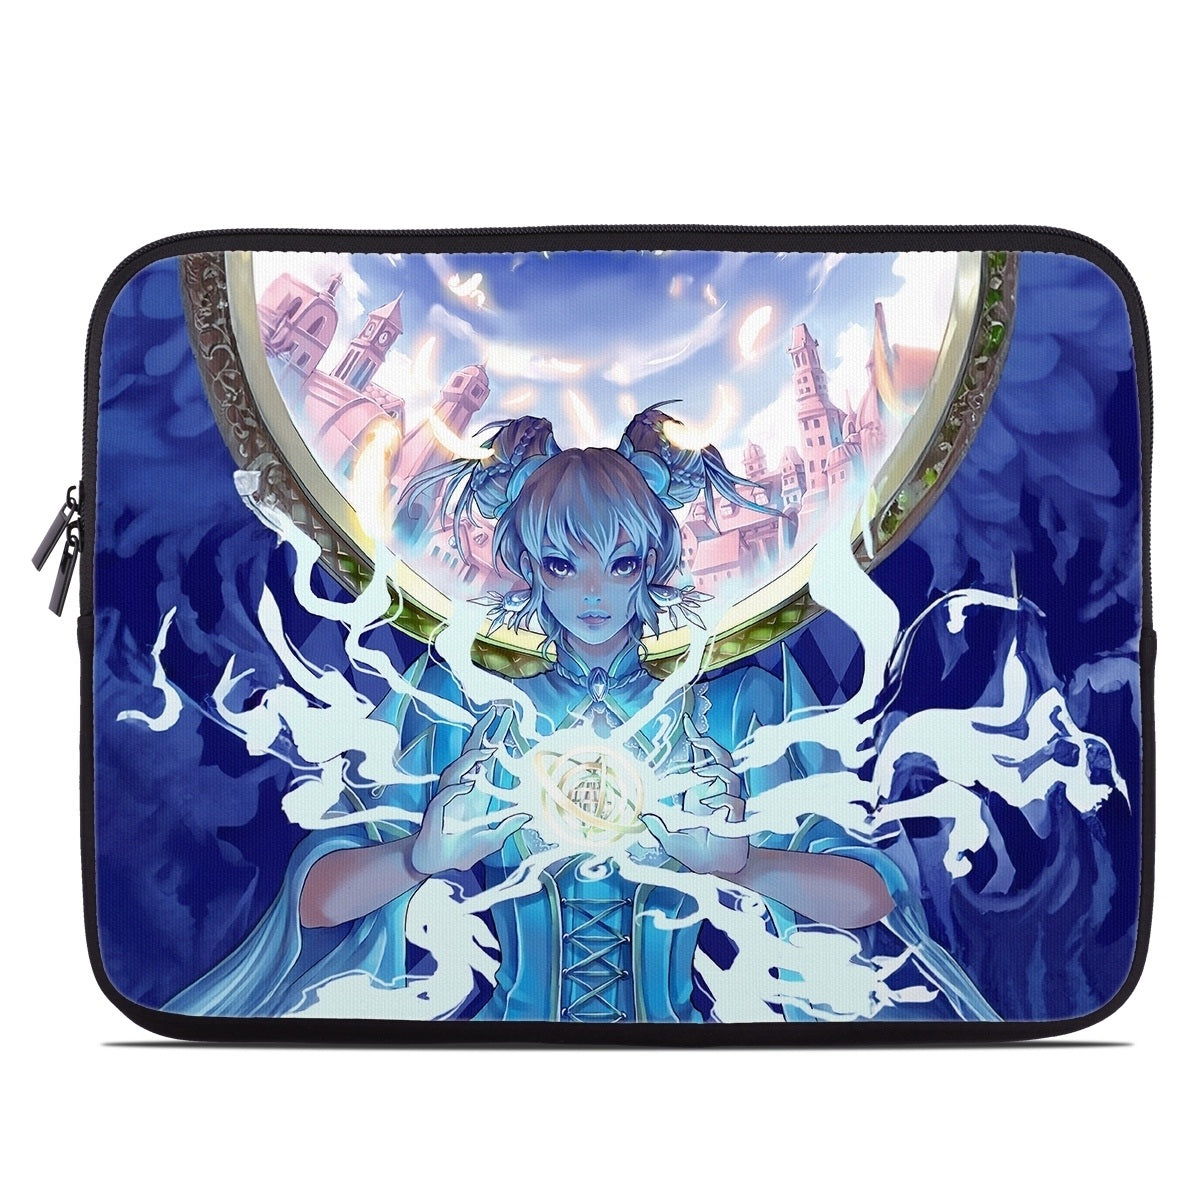 A Vision - Laptop Sleeve